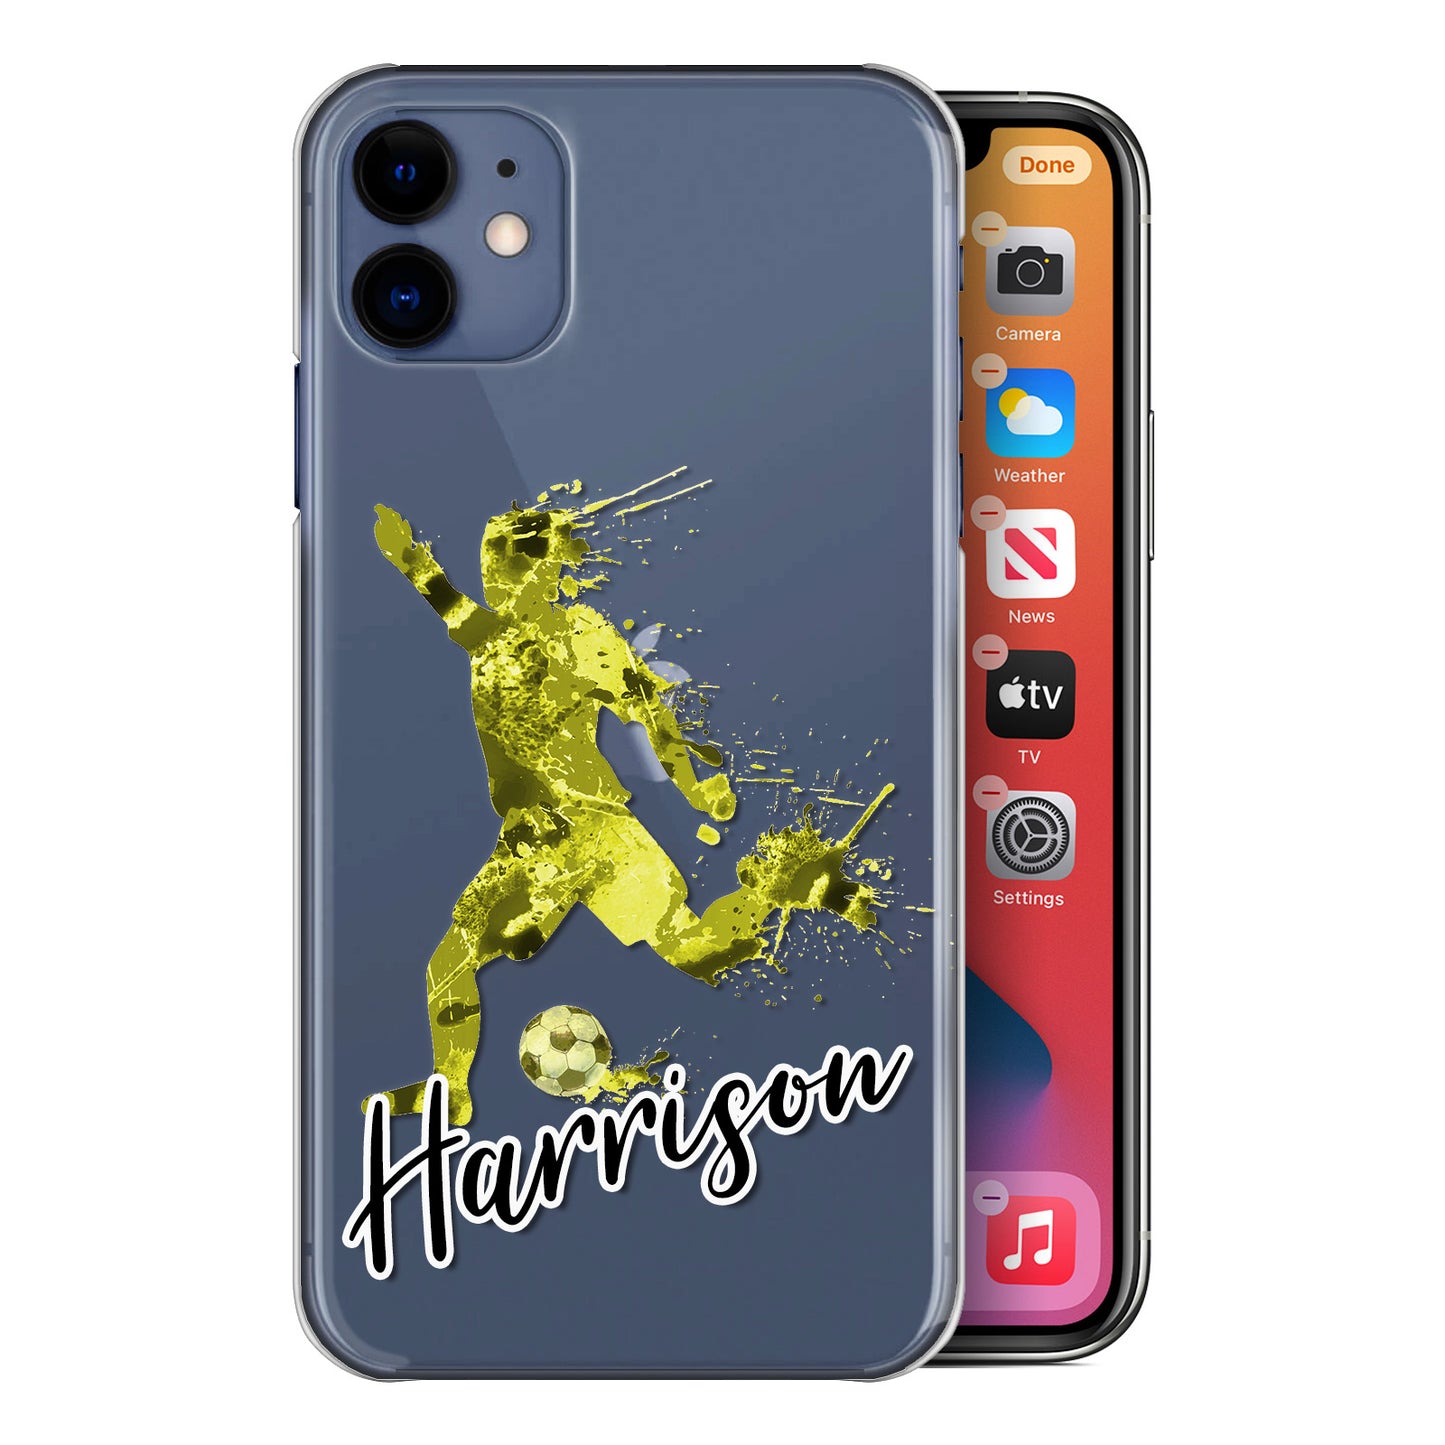 Personalised Google Phone Hard Case - Zesty Yellow Football Star with White Outlined Text